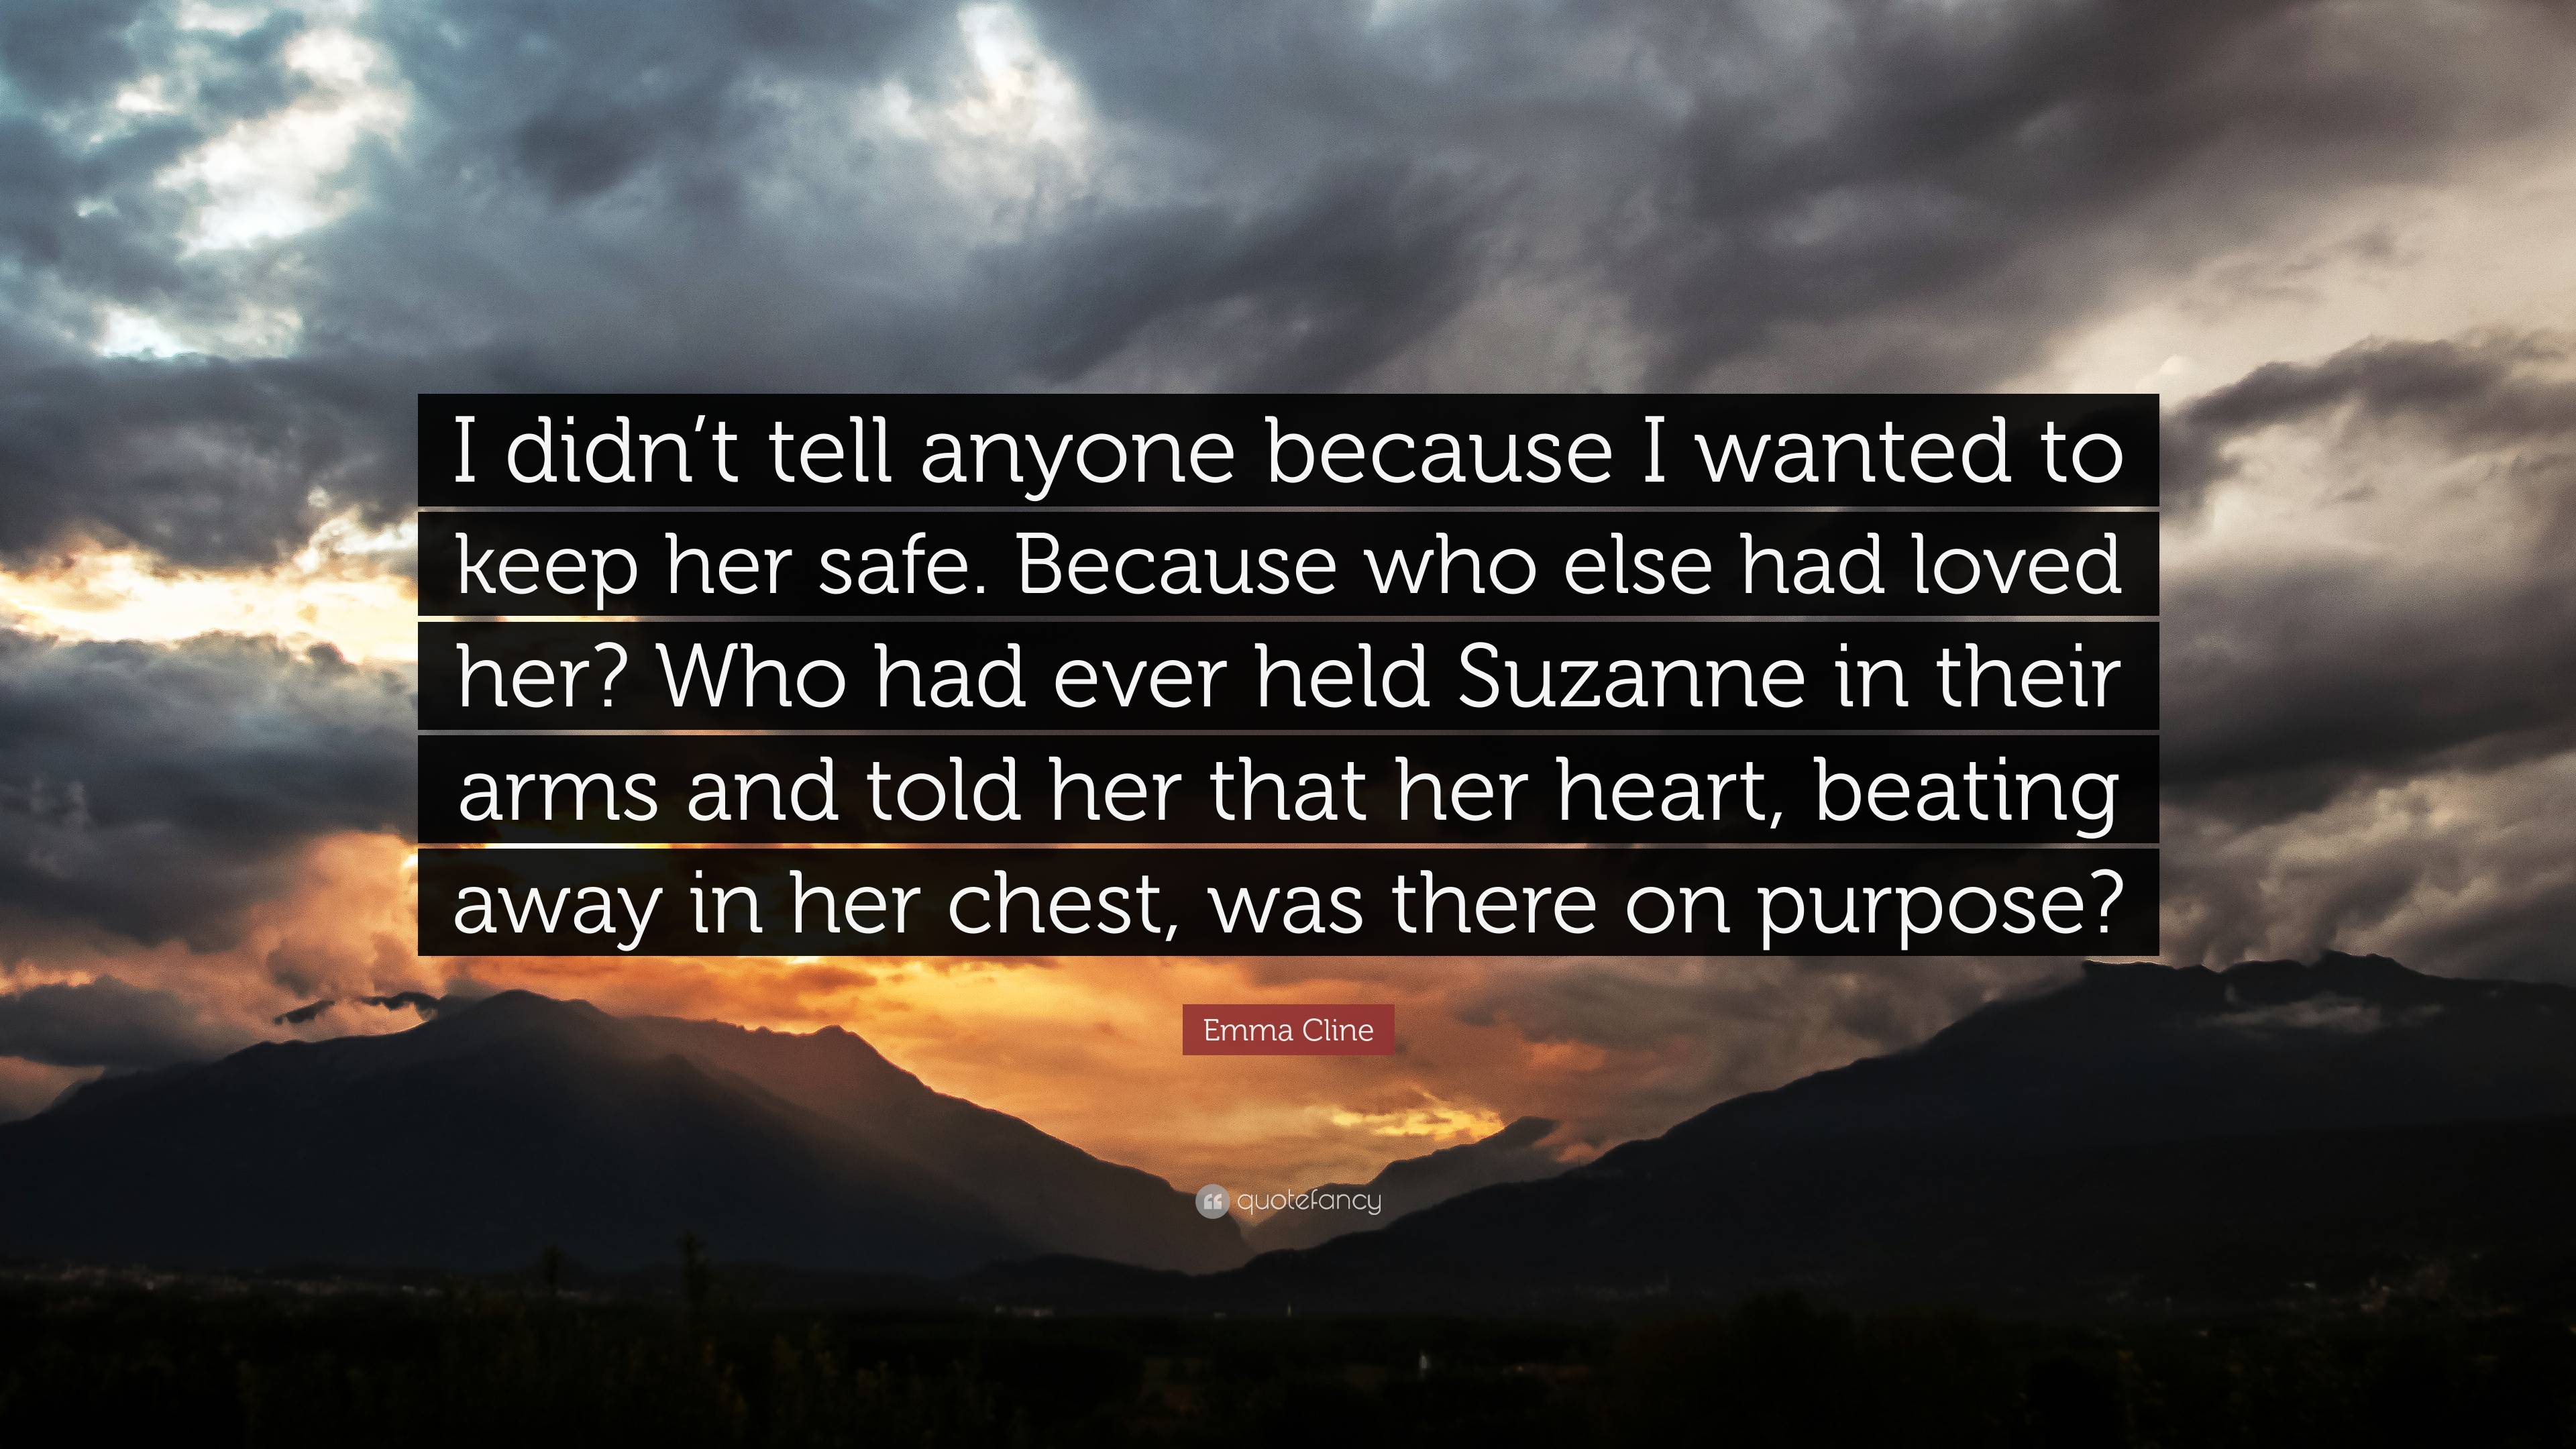 Emma Cline Quote: “I didn’t tell anyone because I wanted to keep her ...